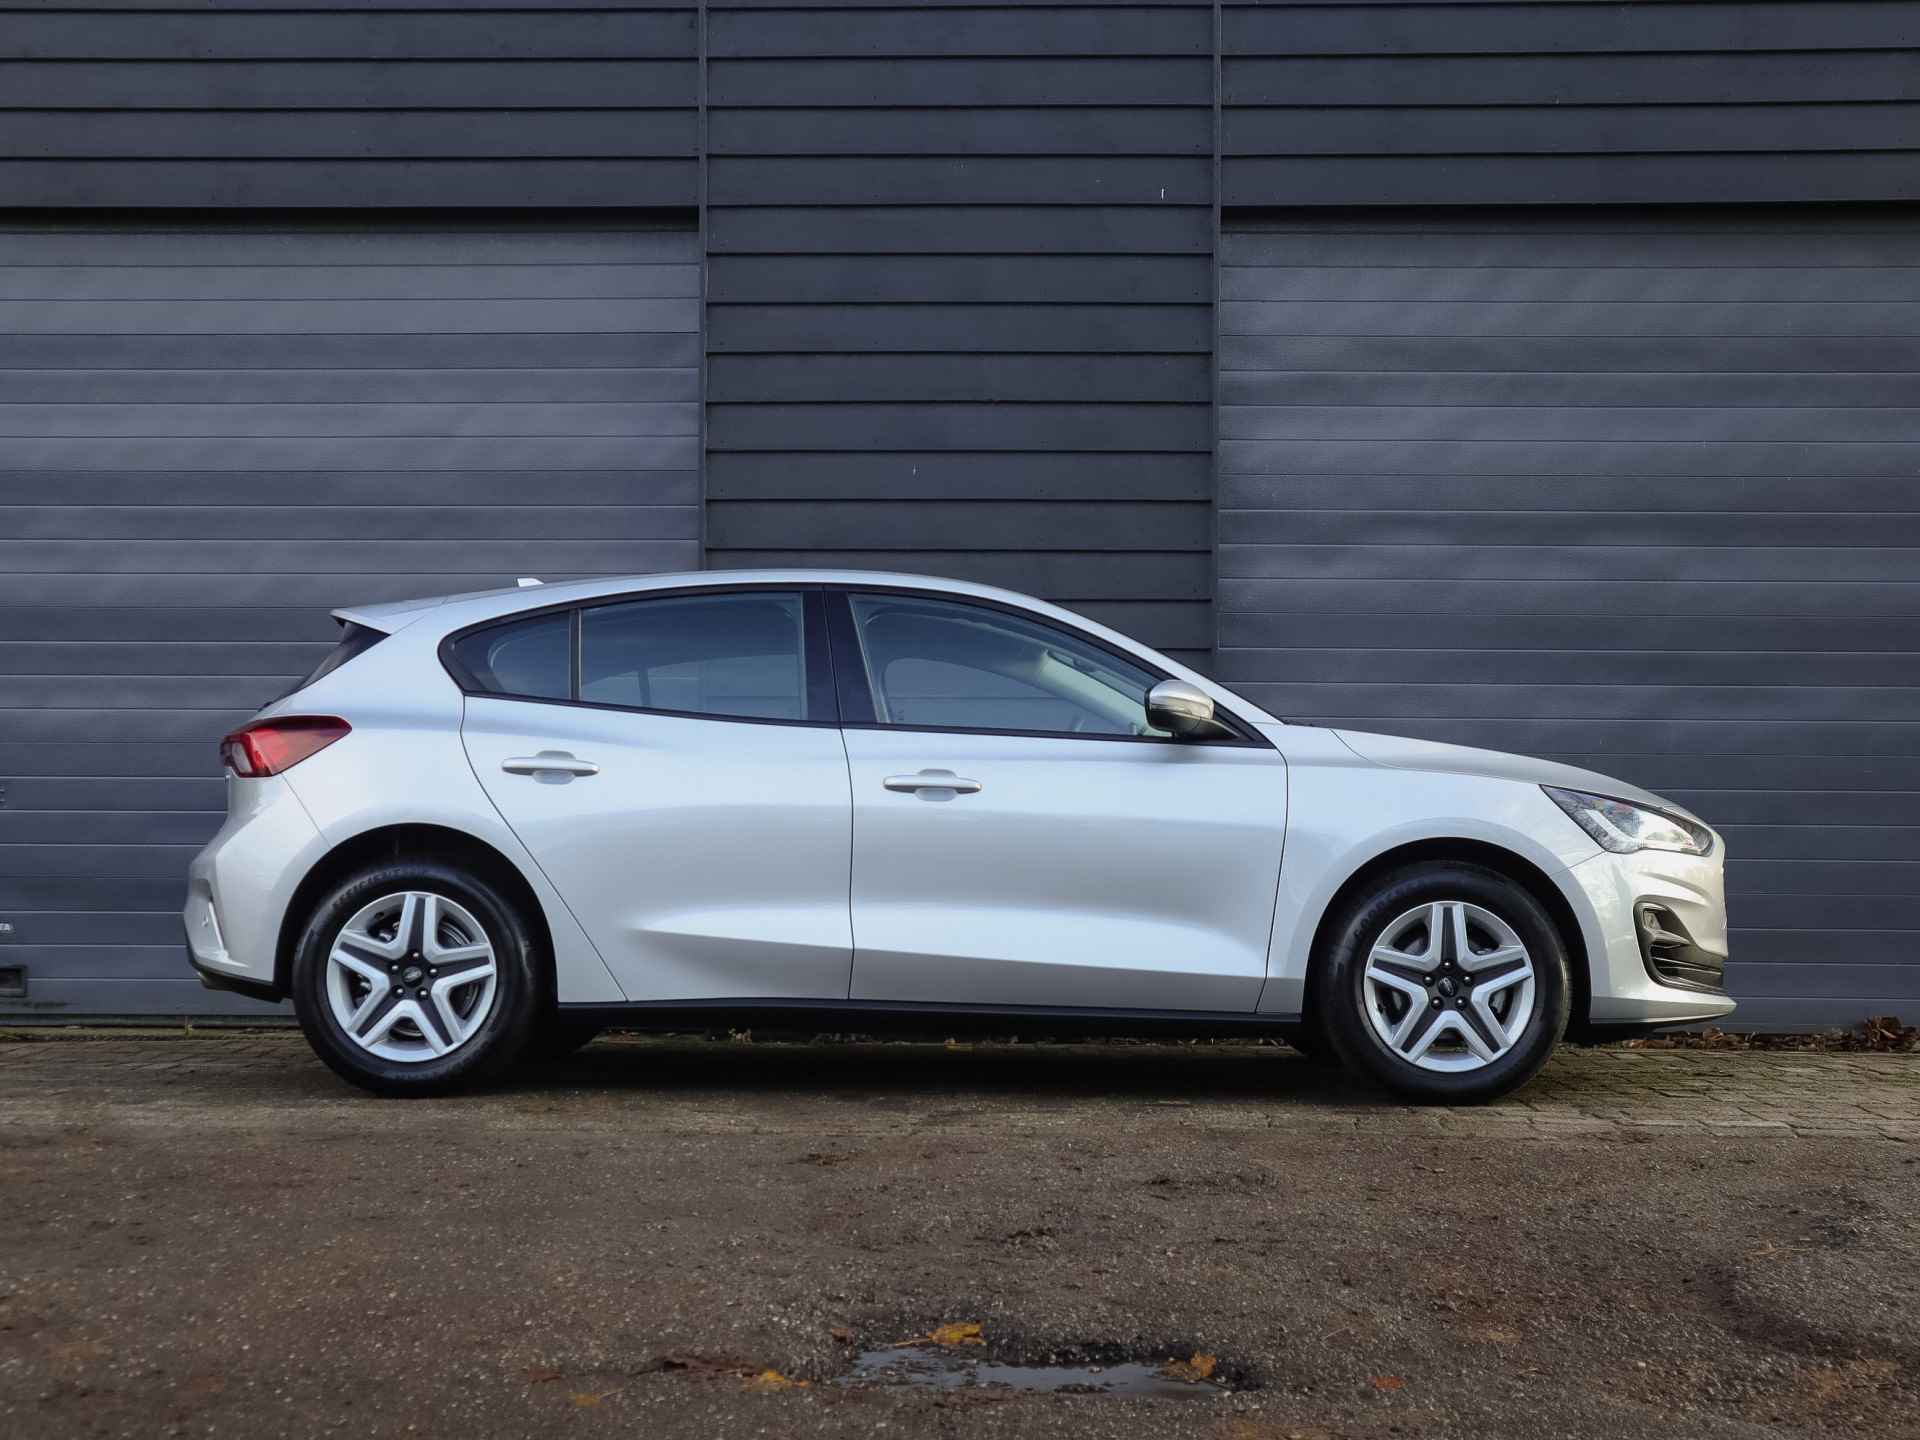 Ford Focus 1.0i Hybrid Connected, (149PK) 1e-Eig, Ford-Dealer-Onderh, 12-Mnd-BOVAG, NL-Auto, Navigatie/Apple-Carplay/Android-Auto, Parkeersensoren-V+A, Cruise-Control, Airco, DAB, Lane-Assist, Privacy-Glas, Sportstoelen, Led-Koplampen, Adaptieve-Cruise-Control - 5/55